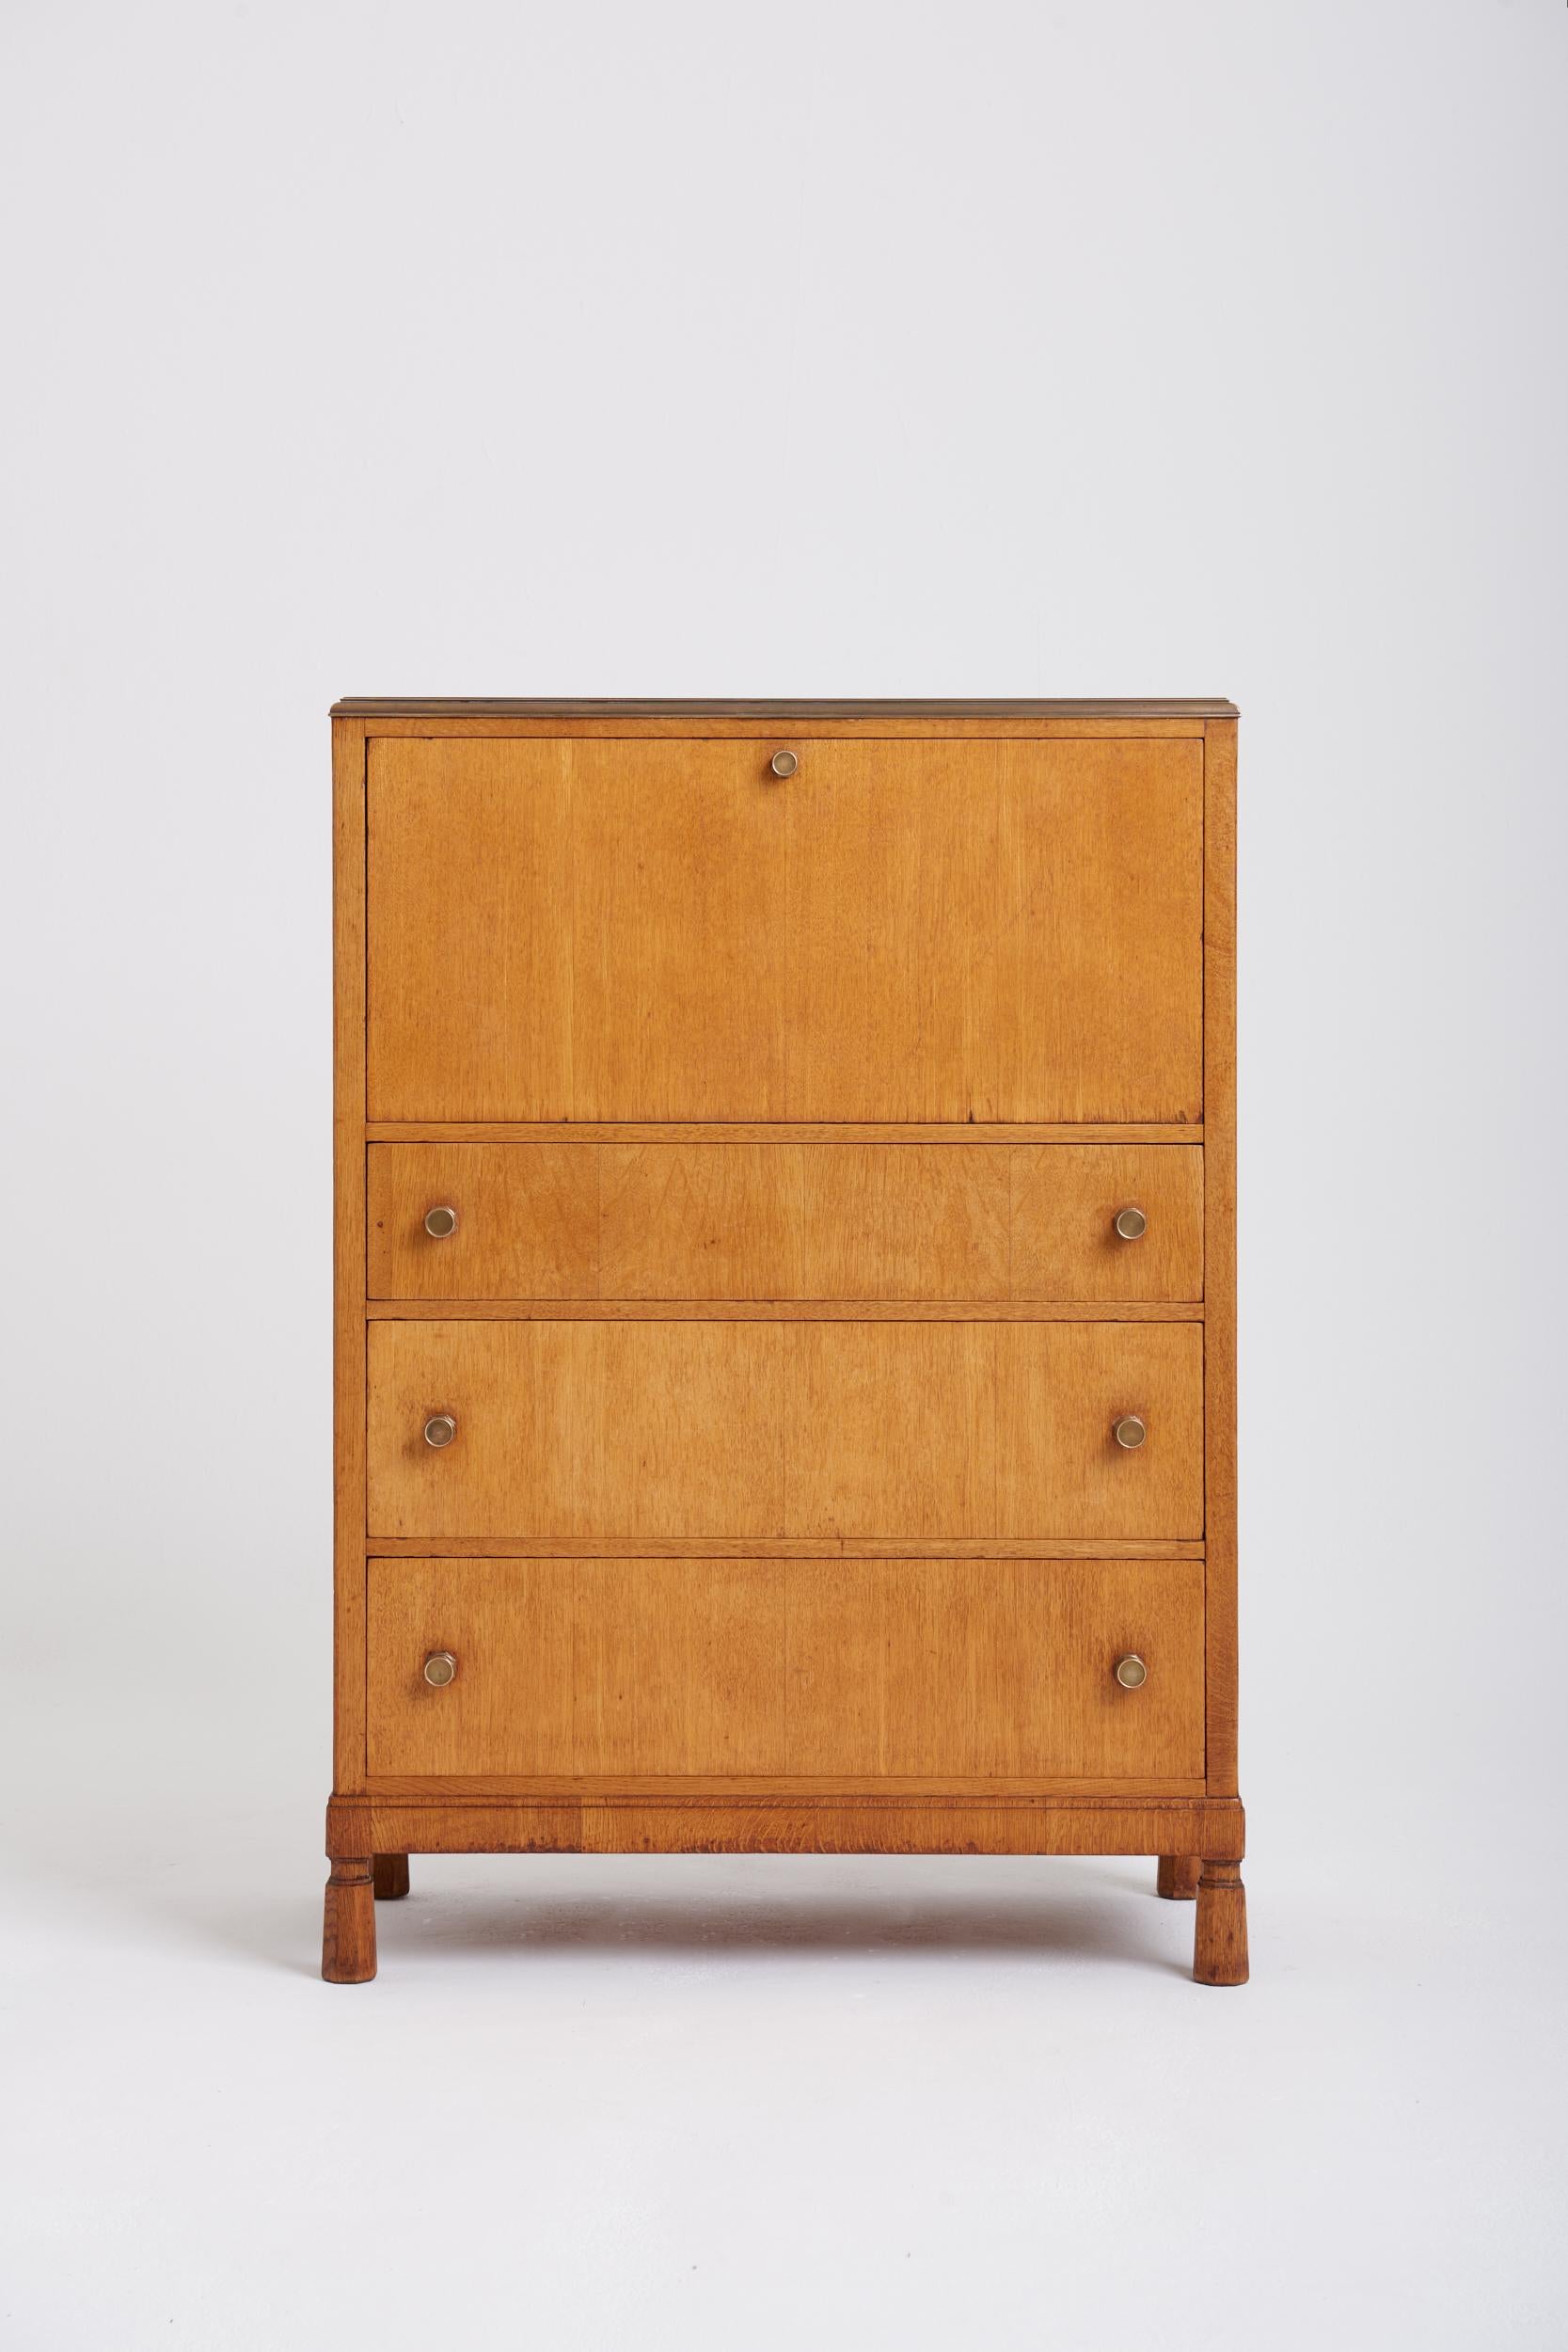 An Arts & Craft oak secretaire, by H Morris & Co of Glasgow, with a most unusual Bakelite top with a brass mount, supported on faceted tapered solid oak feet, the three drawers with brass faceted knobs below an abbattant revealing an oak lined